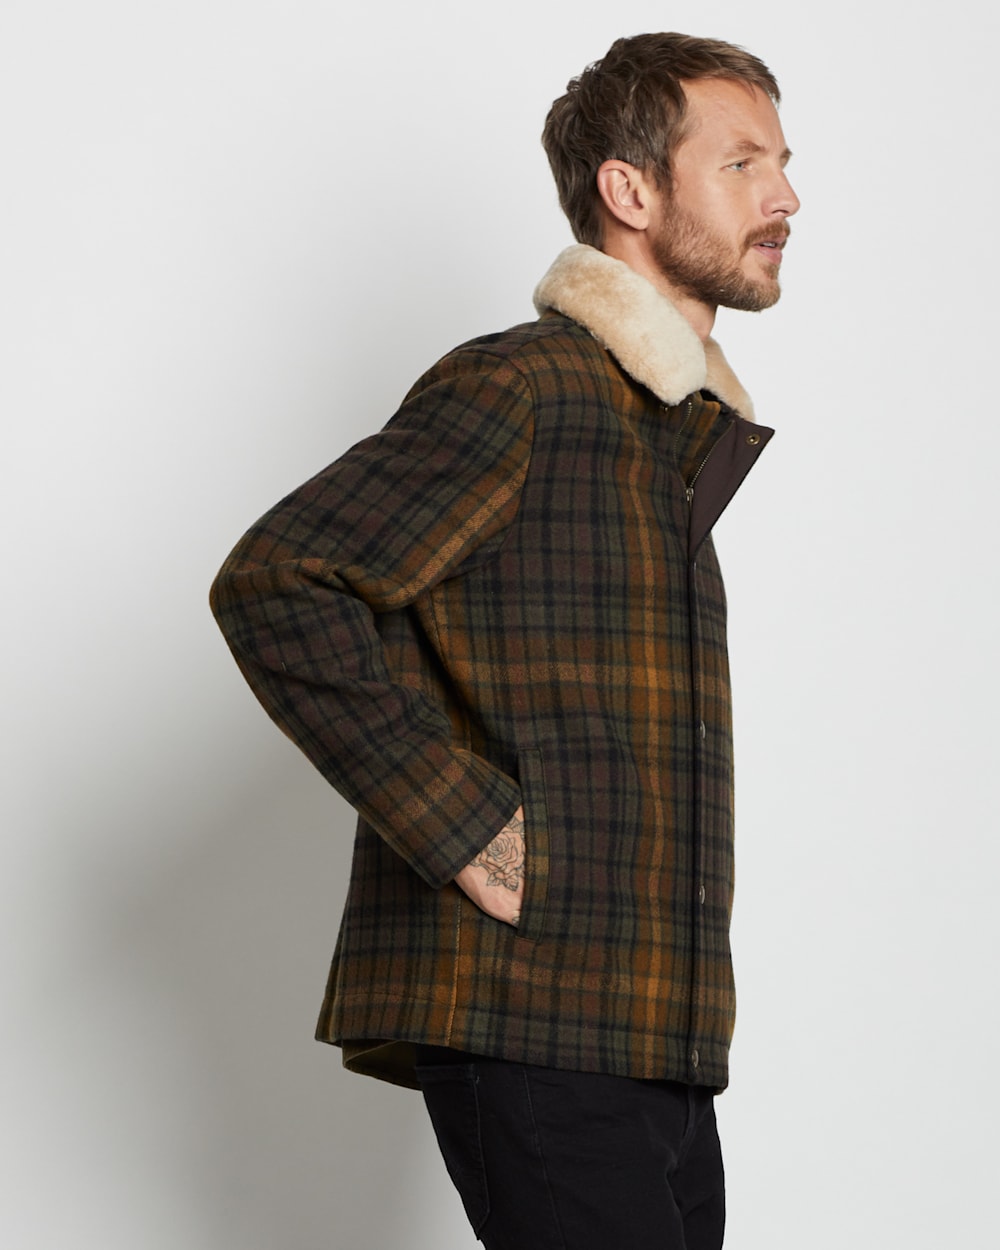 ALTERNATE VIEW OF MEN'S PLAID SILVERTON COAT IN OLIVE/GREEN image number 3